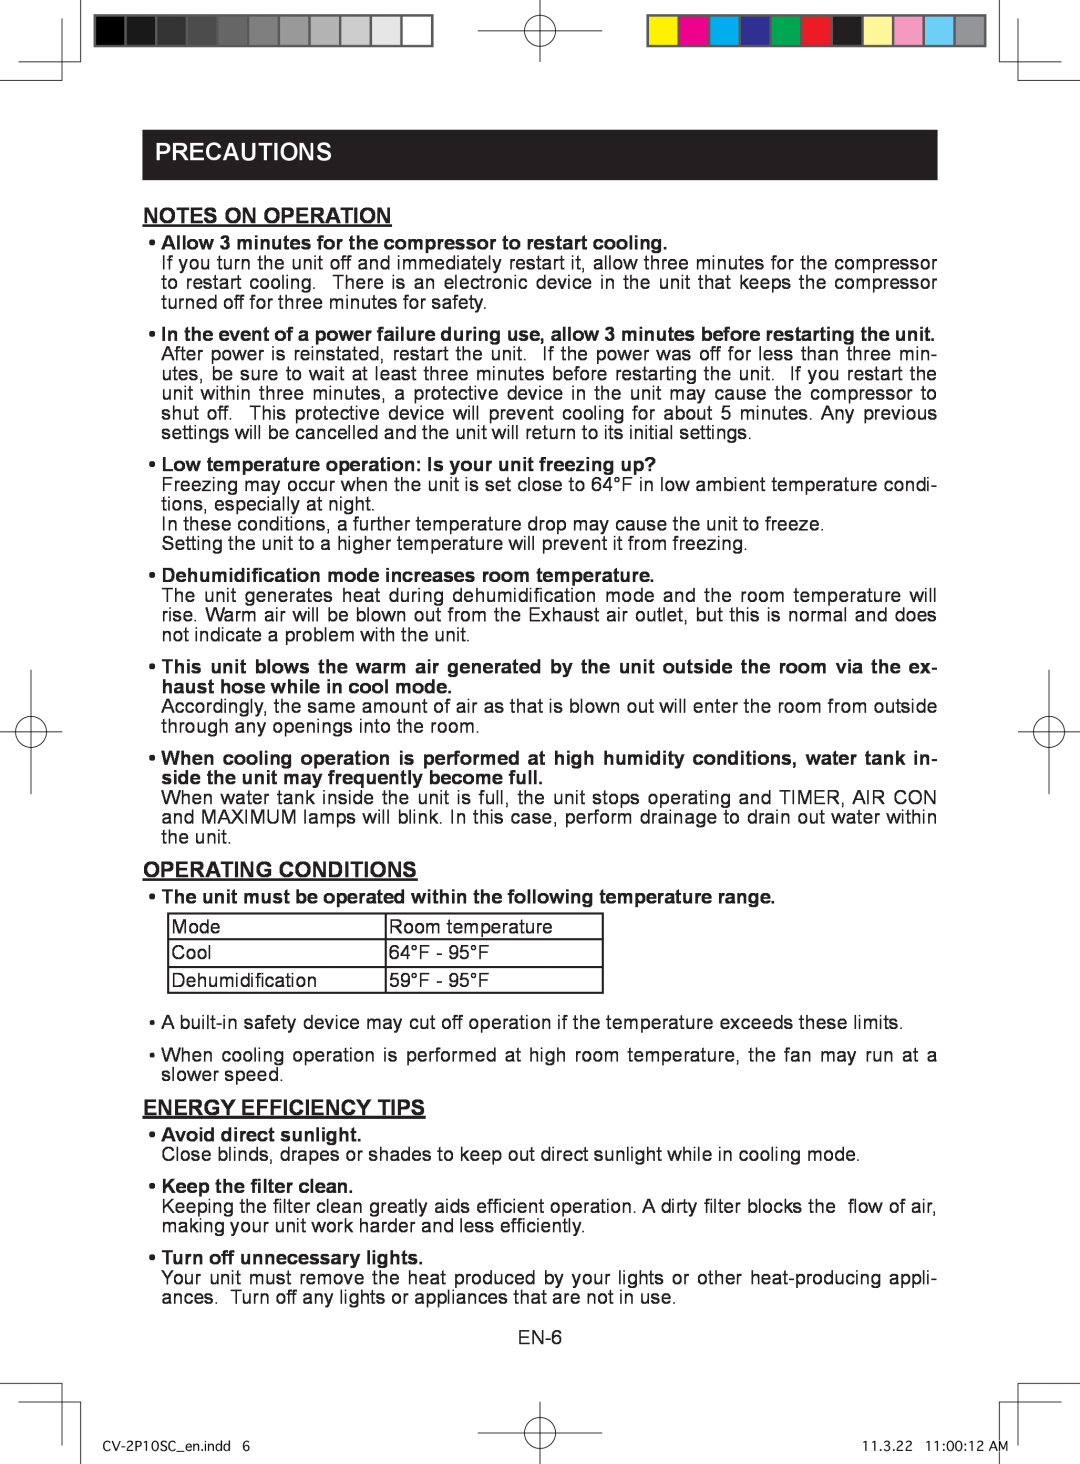 Sharp CV-2P10SC operation manual Notes On Operation, Operating Conditions, Energy Efficiency Tips, Precautions 